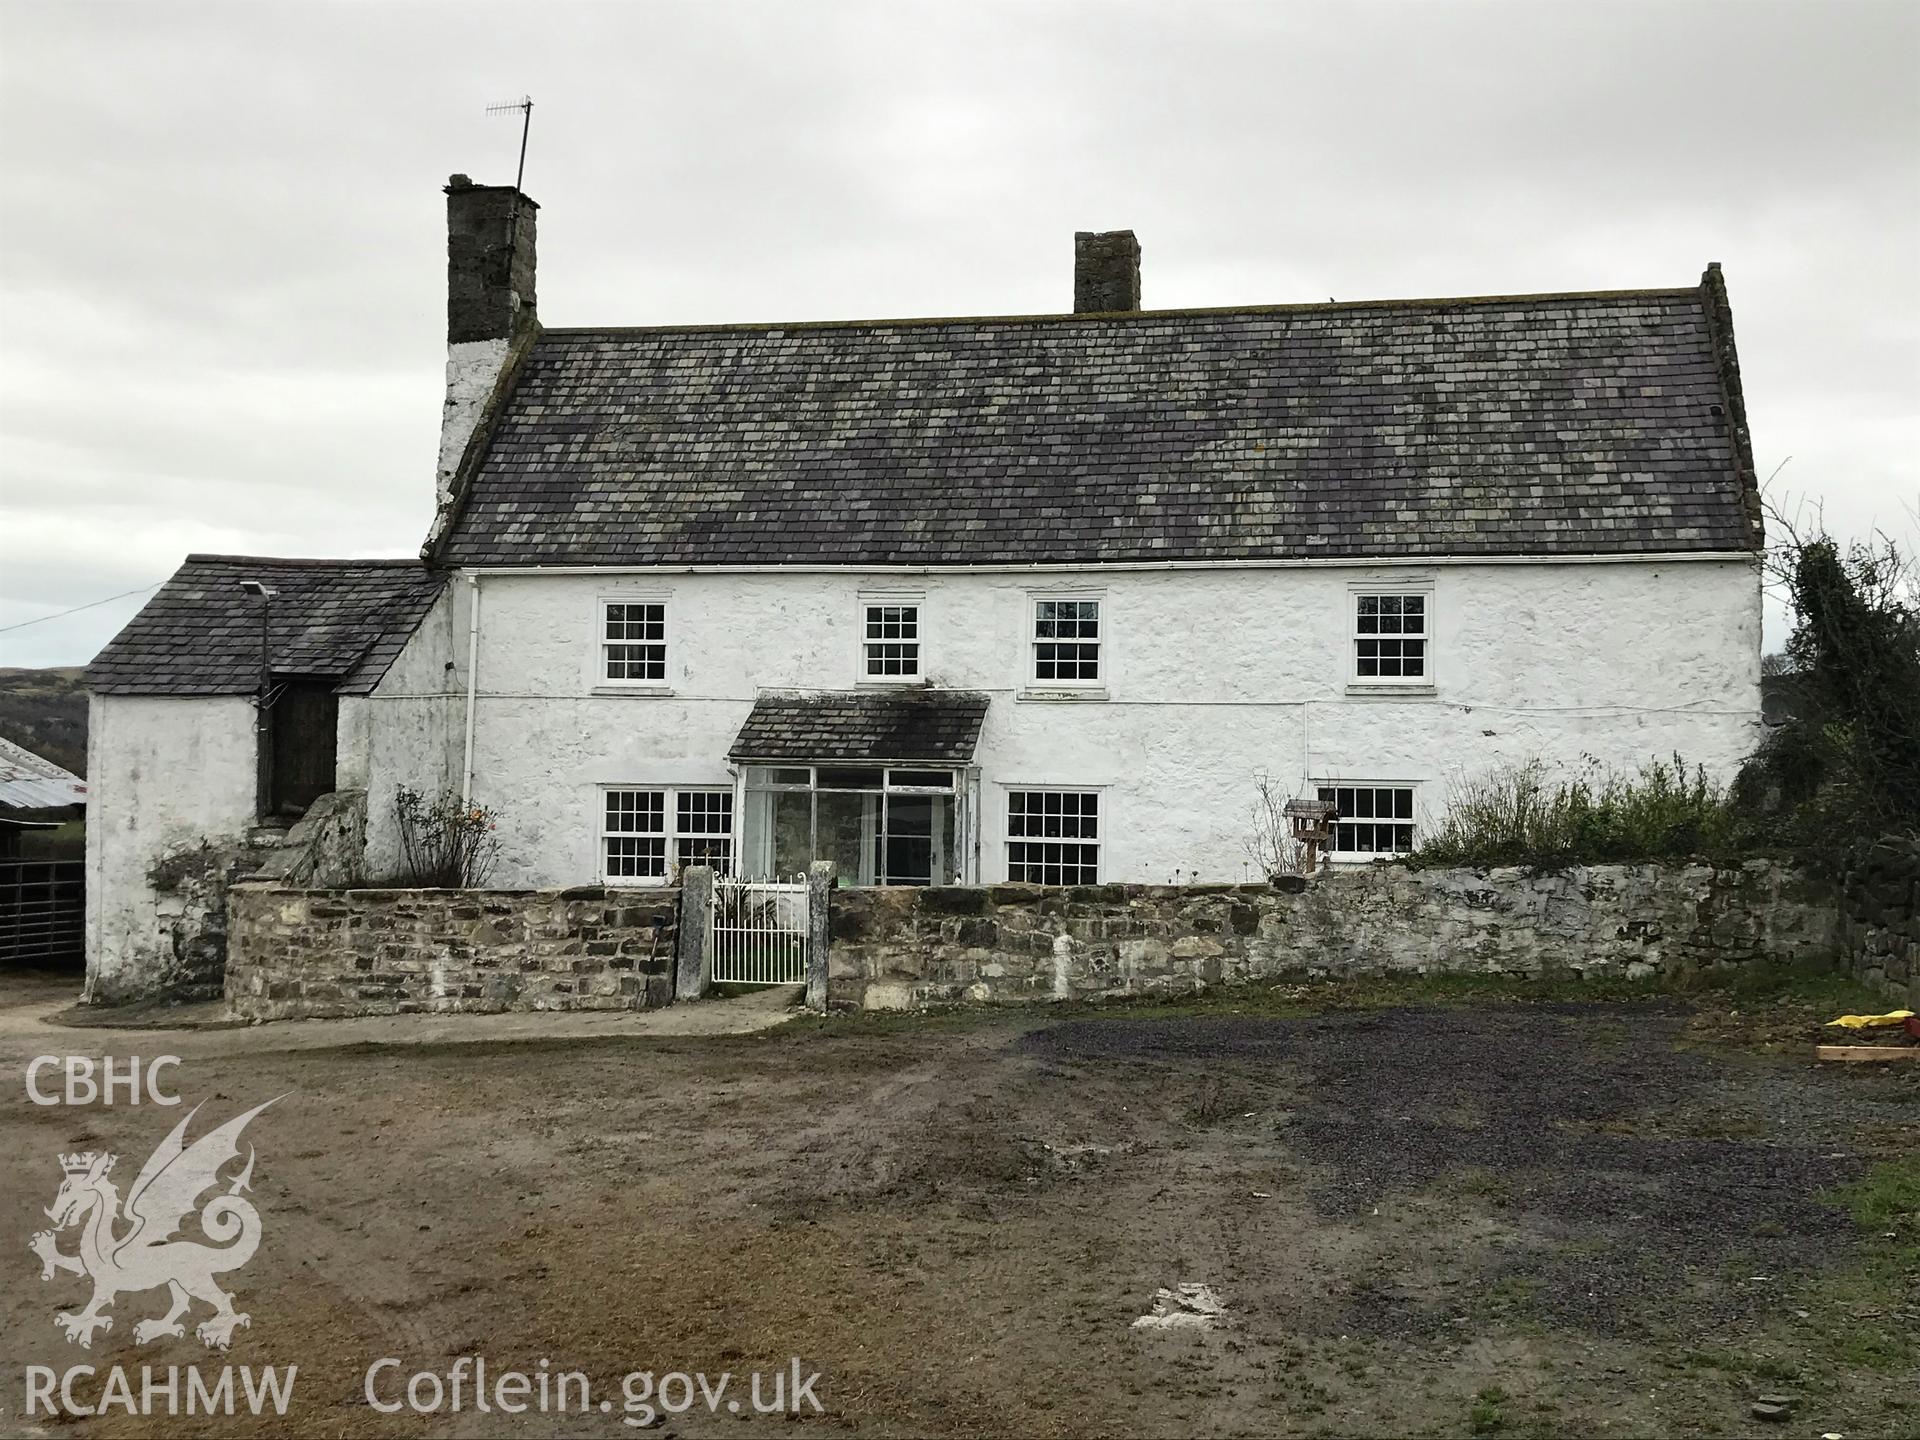 Digital colour photograph showing exterior view of front and side elevation of Bryn Ffanigl Uchaf house, Betws y Rhos, taken by Paul Davis on 3rd December 2019.